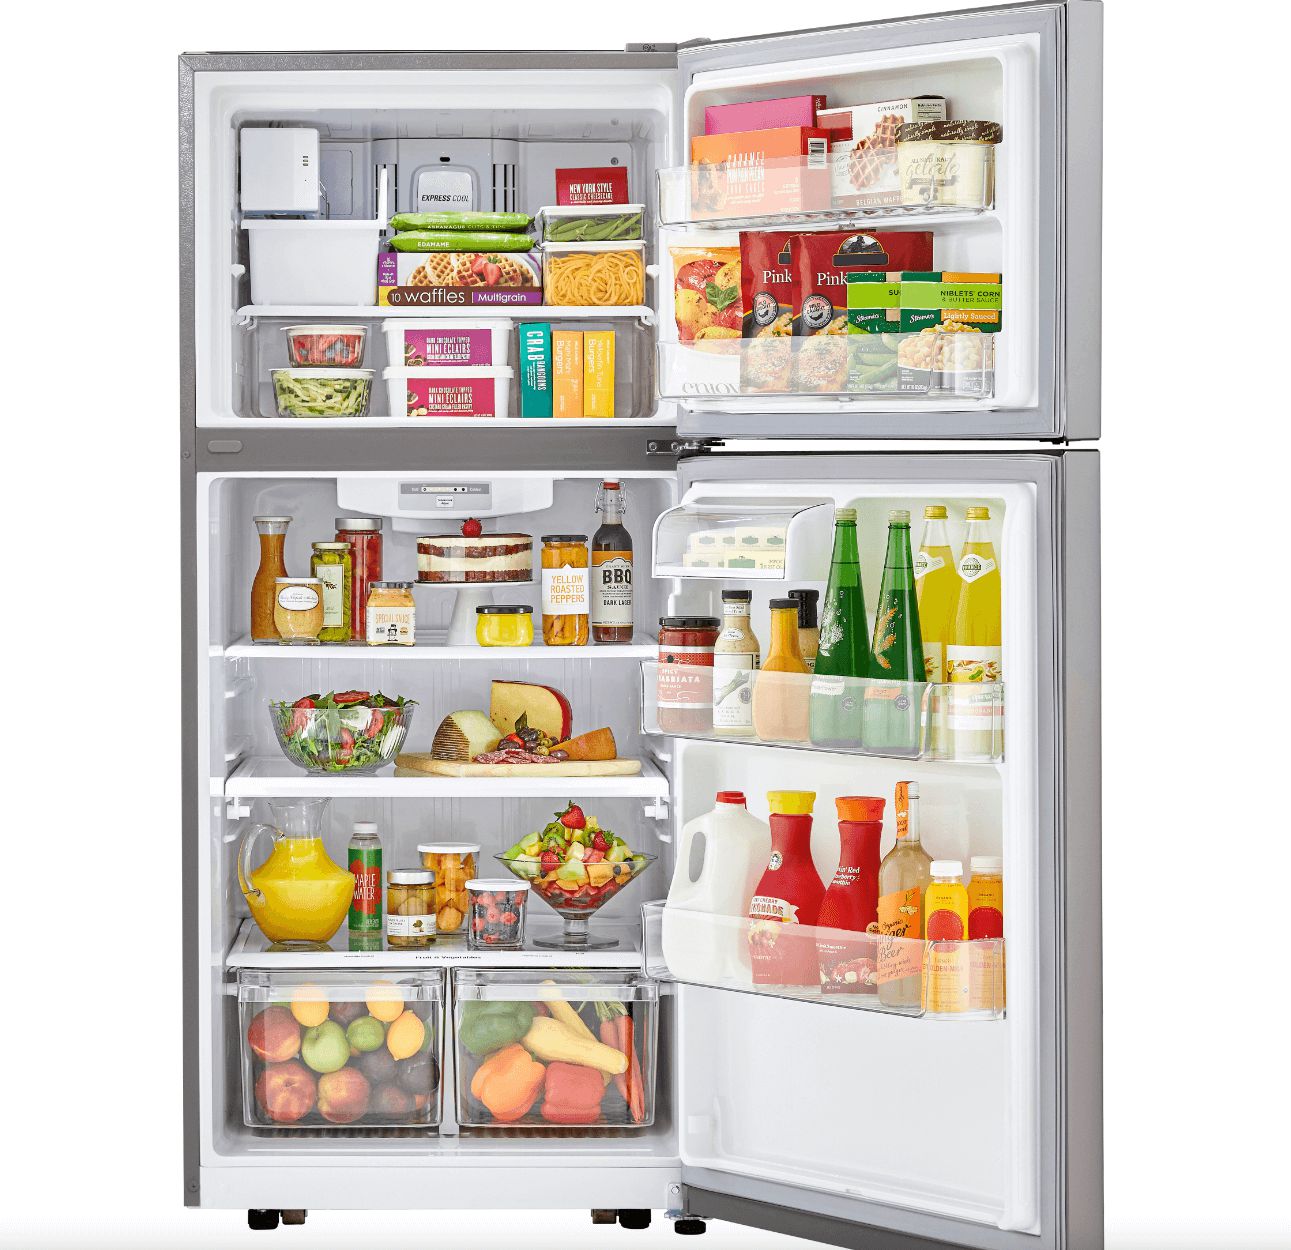 LG 30 Inch Refrigerator with Top-Mount Freezer in Stainless Steel 20 Cu. Ft. (LTCS20030S)